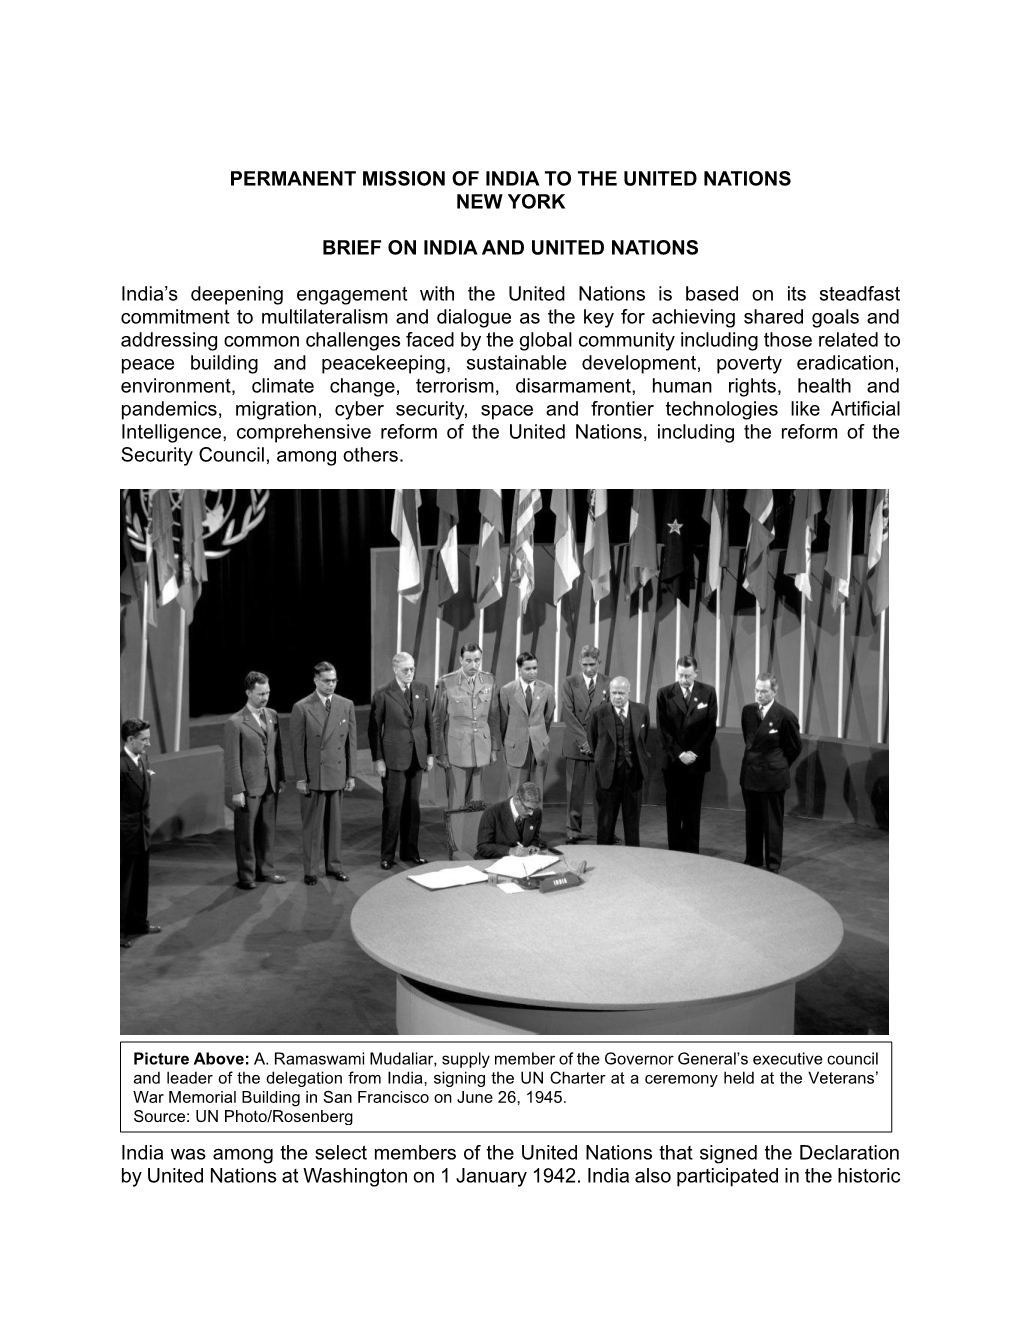 Permanent Mission of India to the United Nations New York